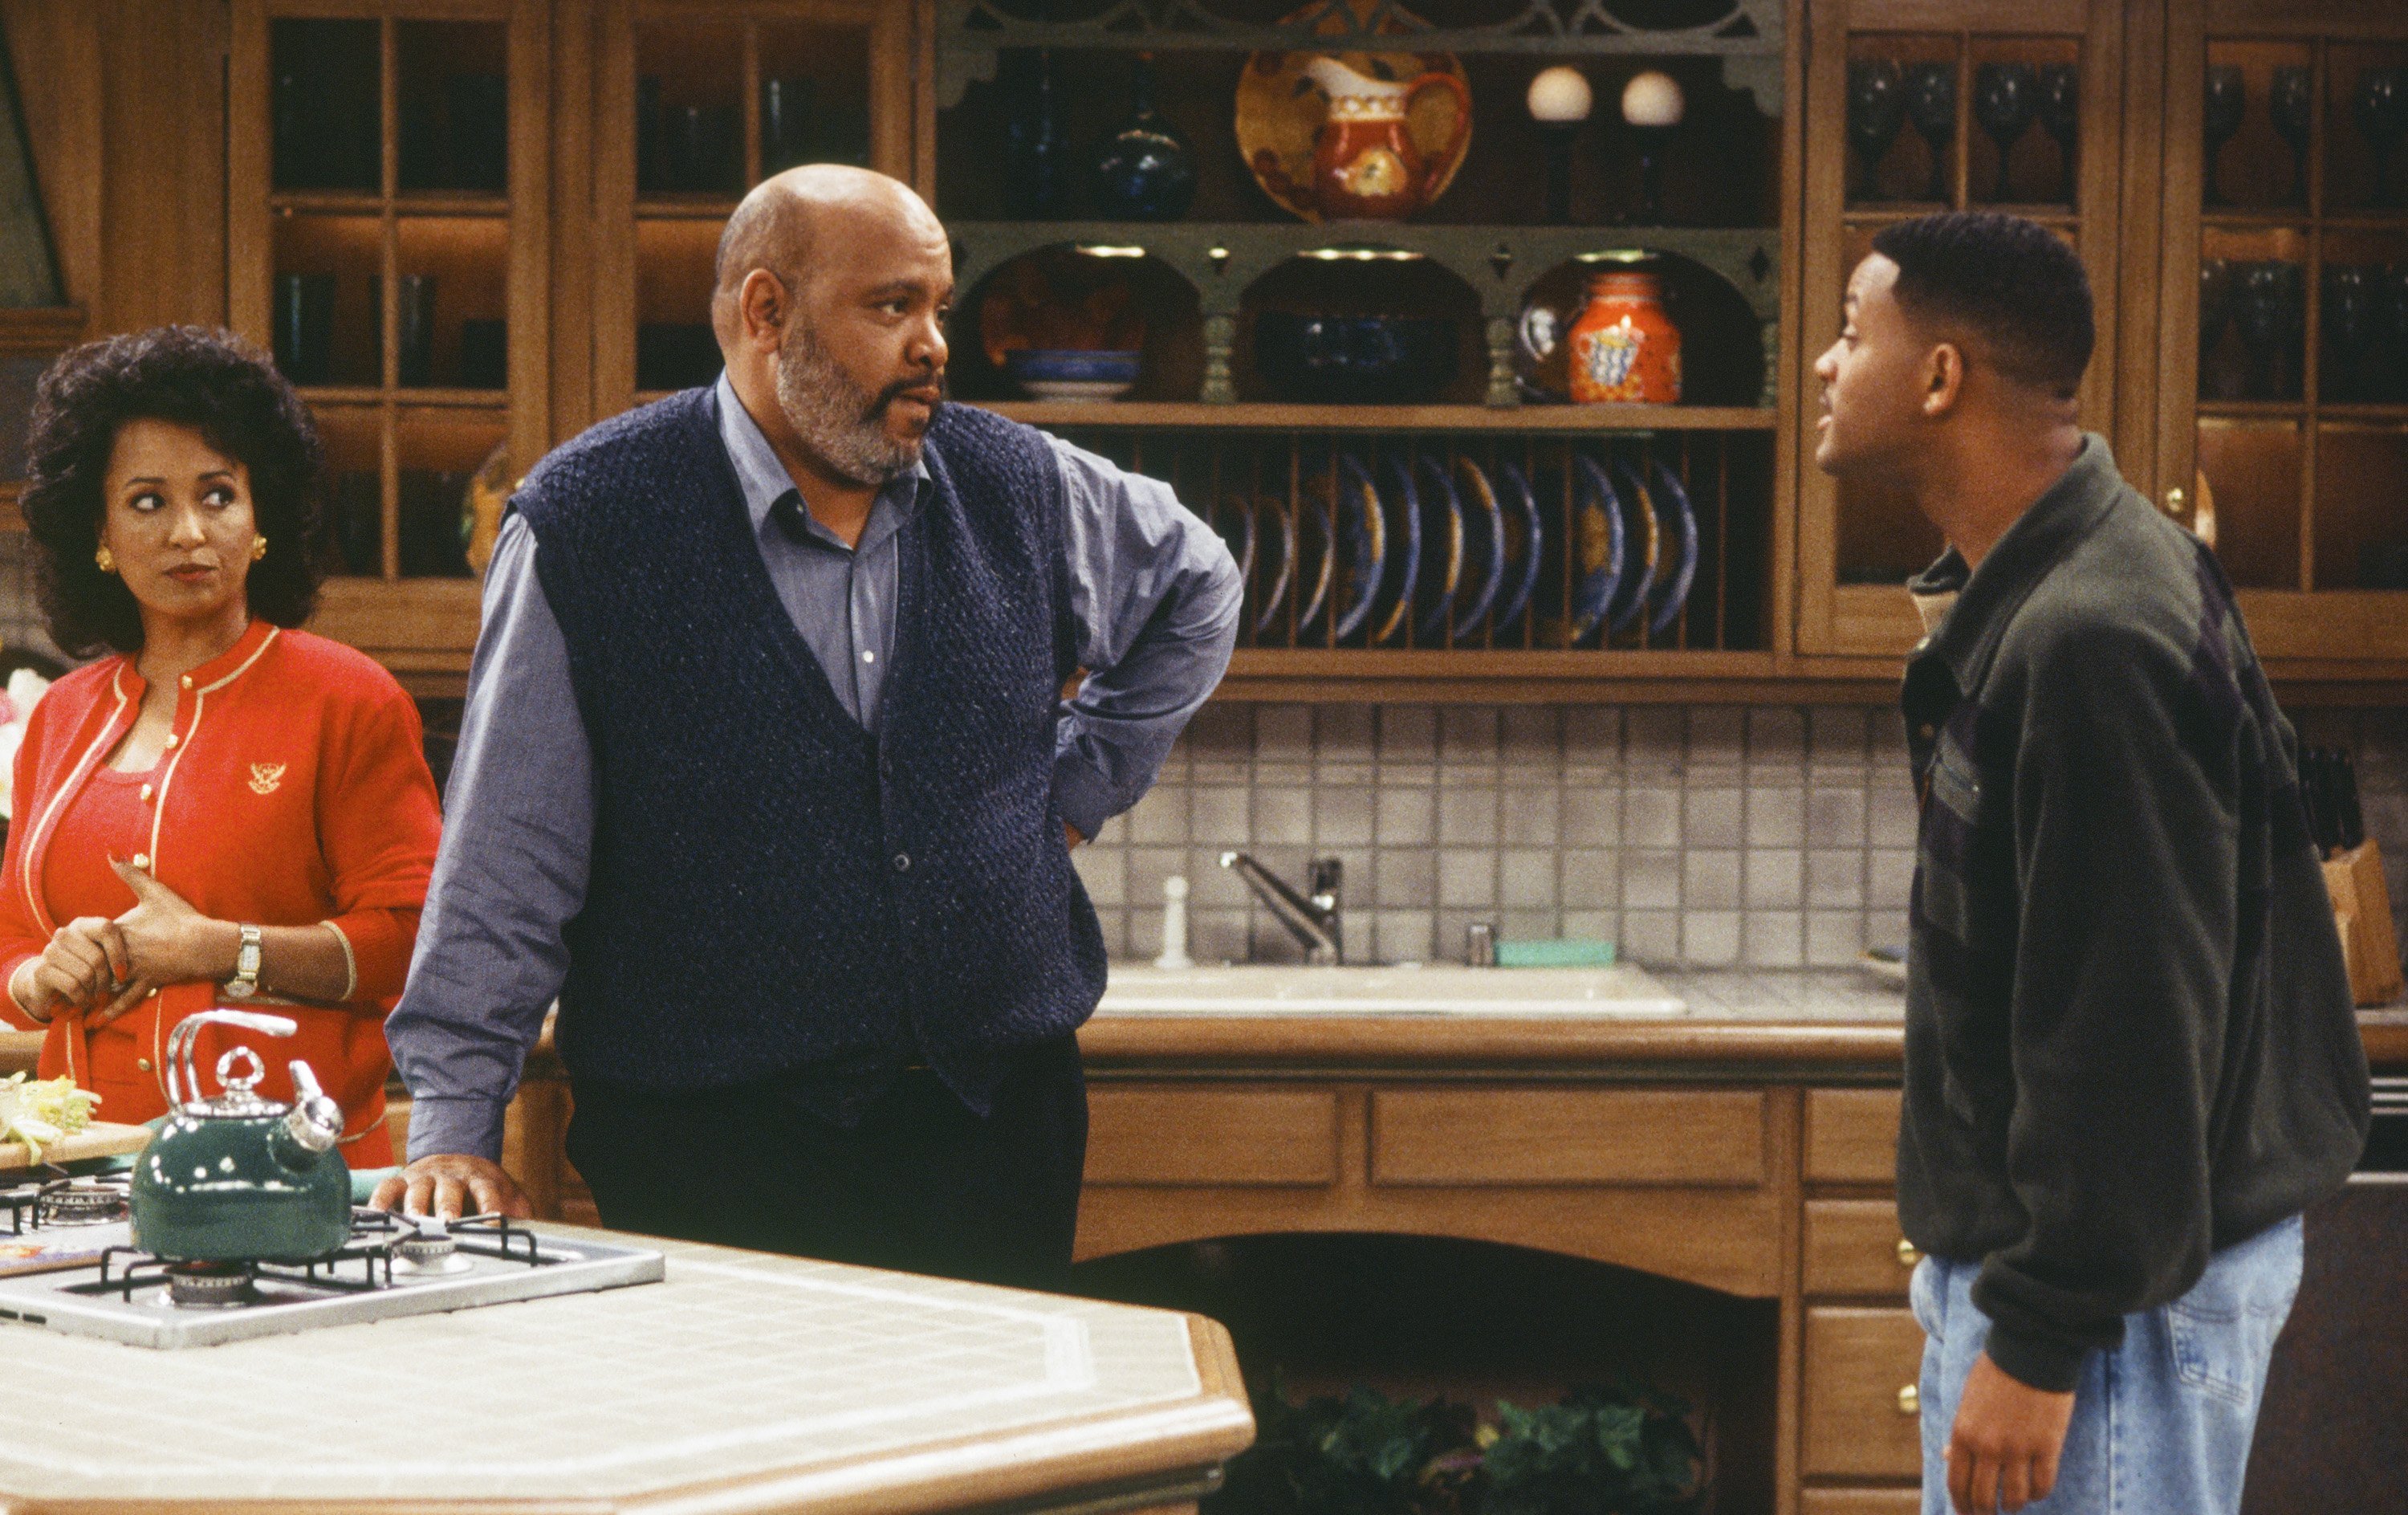 FRESH PRINCE OF BEL-AIR, THE -- "Hare Today" Episode 18 -- Pictured: (l-r) Daphne Maxwell Reid as Vivian Banks, James Avery as Philip Banks, Will Smith as William 'Will' Smith